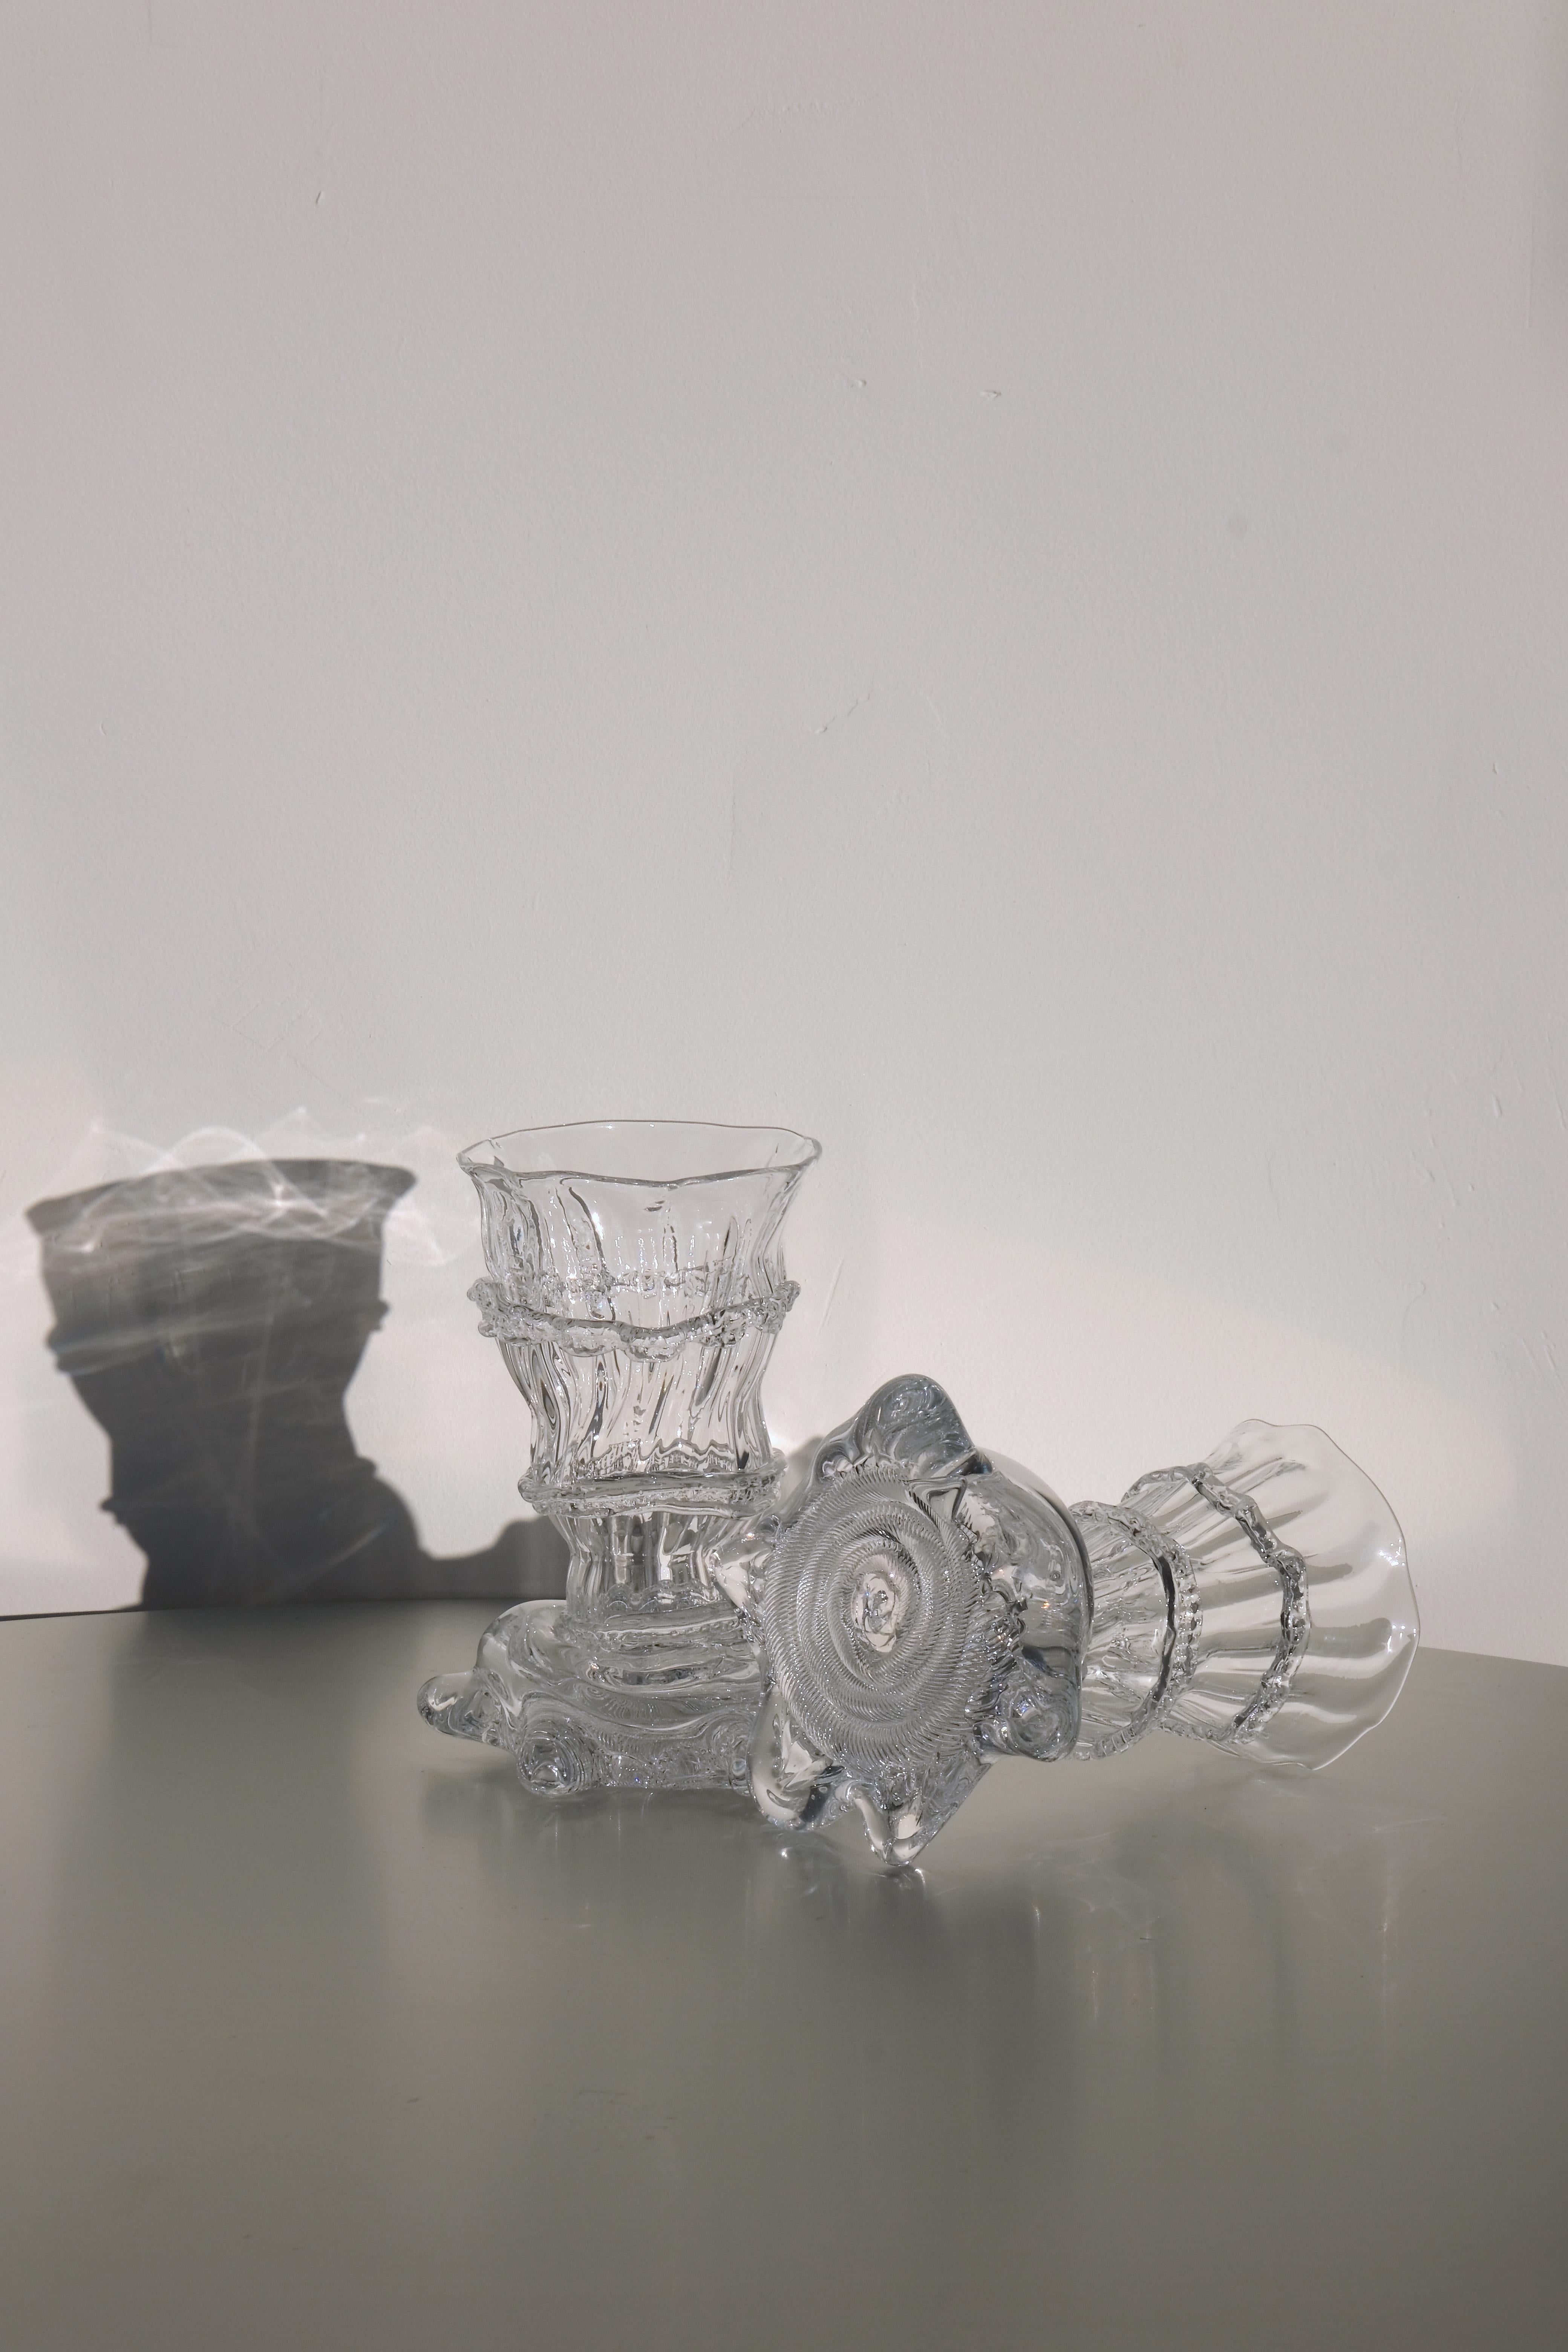 All of the glassware is mouth blown by Alexander Kirkeby in Denmark.
Every piece is therefore unique and will differ slightly in size and decoration. Made of lead-free crystal glass.

Alexander Kirkeby is a glassblower
and designer working within